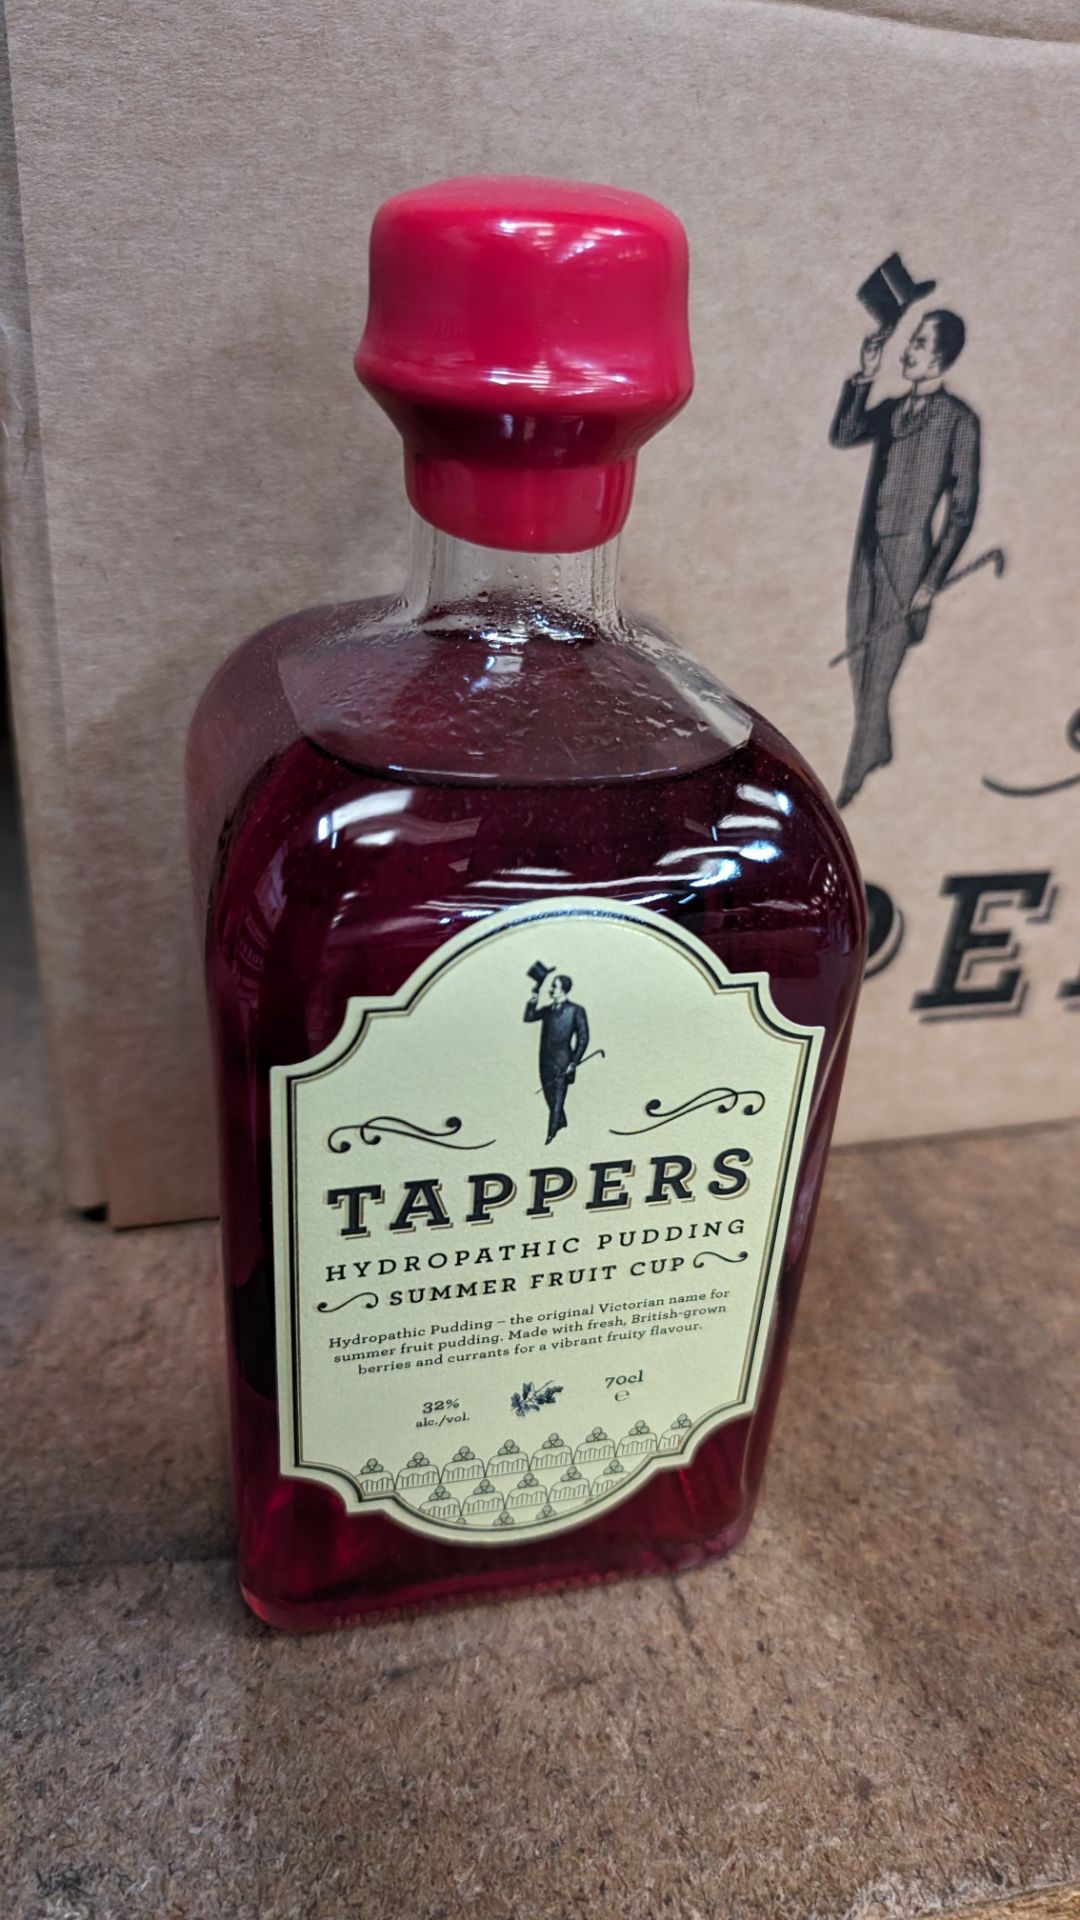 6 off 700ml bottles of Tappers Hydropathic Summer Fruit Cup, 32% ABV. Includes a Tappers presenta - Image 4 of 6